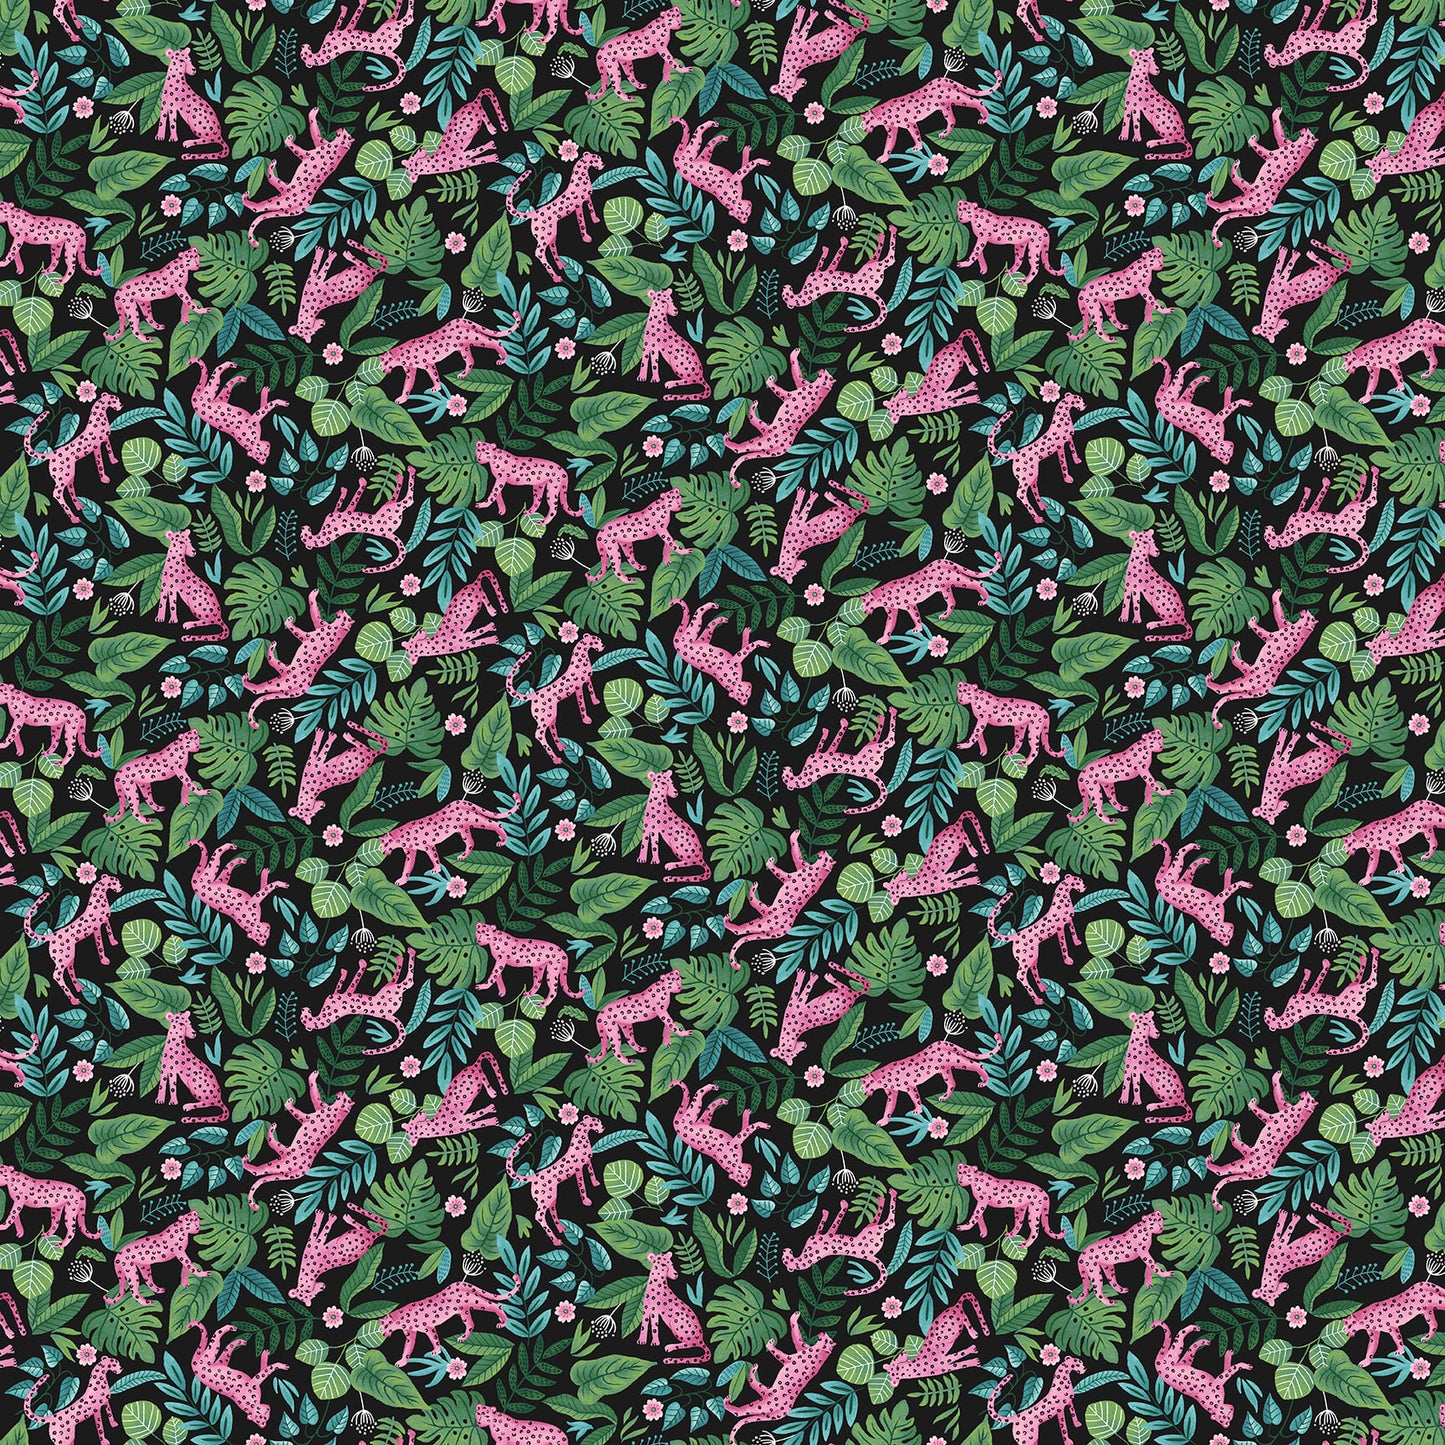 Tropical Menagerie Pink Leopards Fabric - By the yard